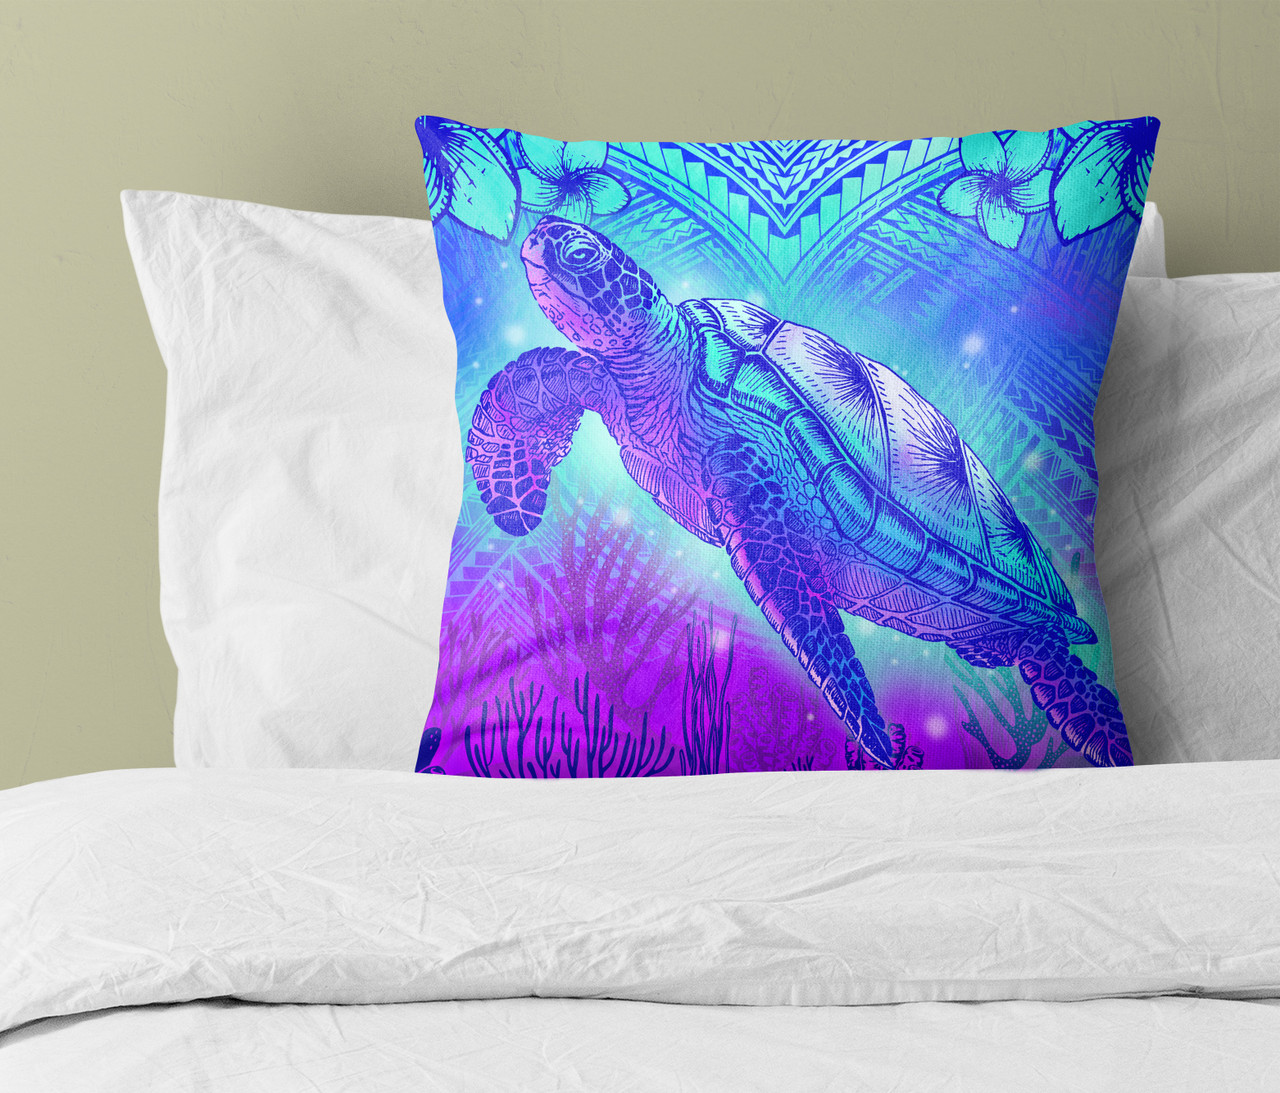 Hawaii Pillow Cover Turtle Underwater Sea Polynesian Style